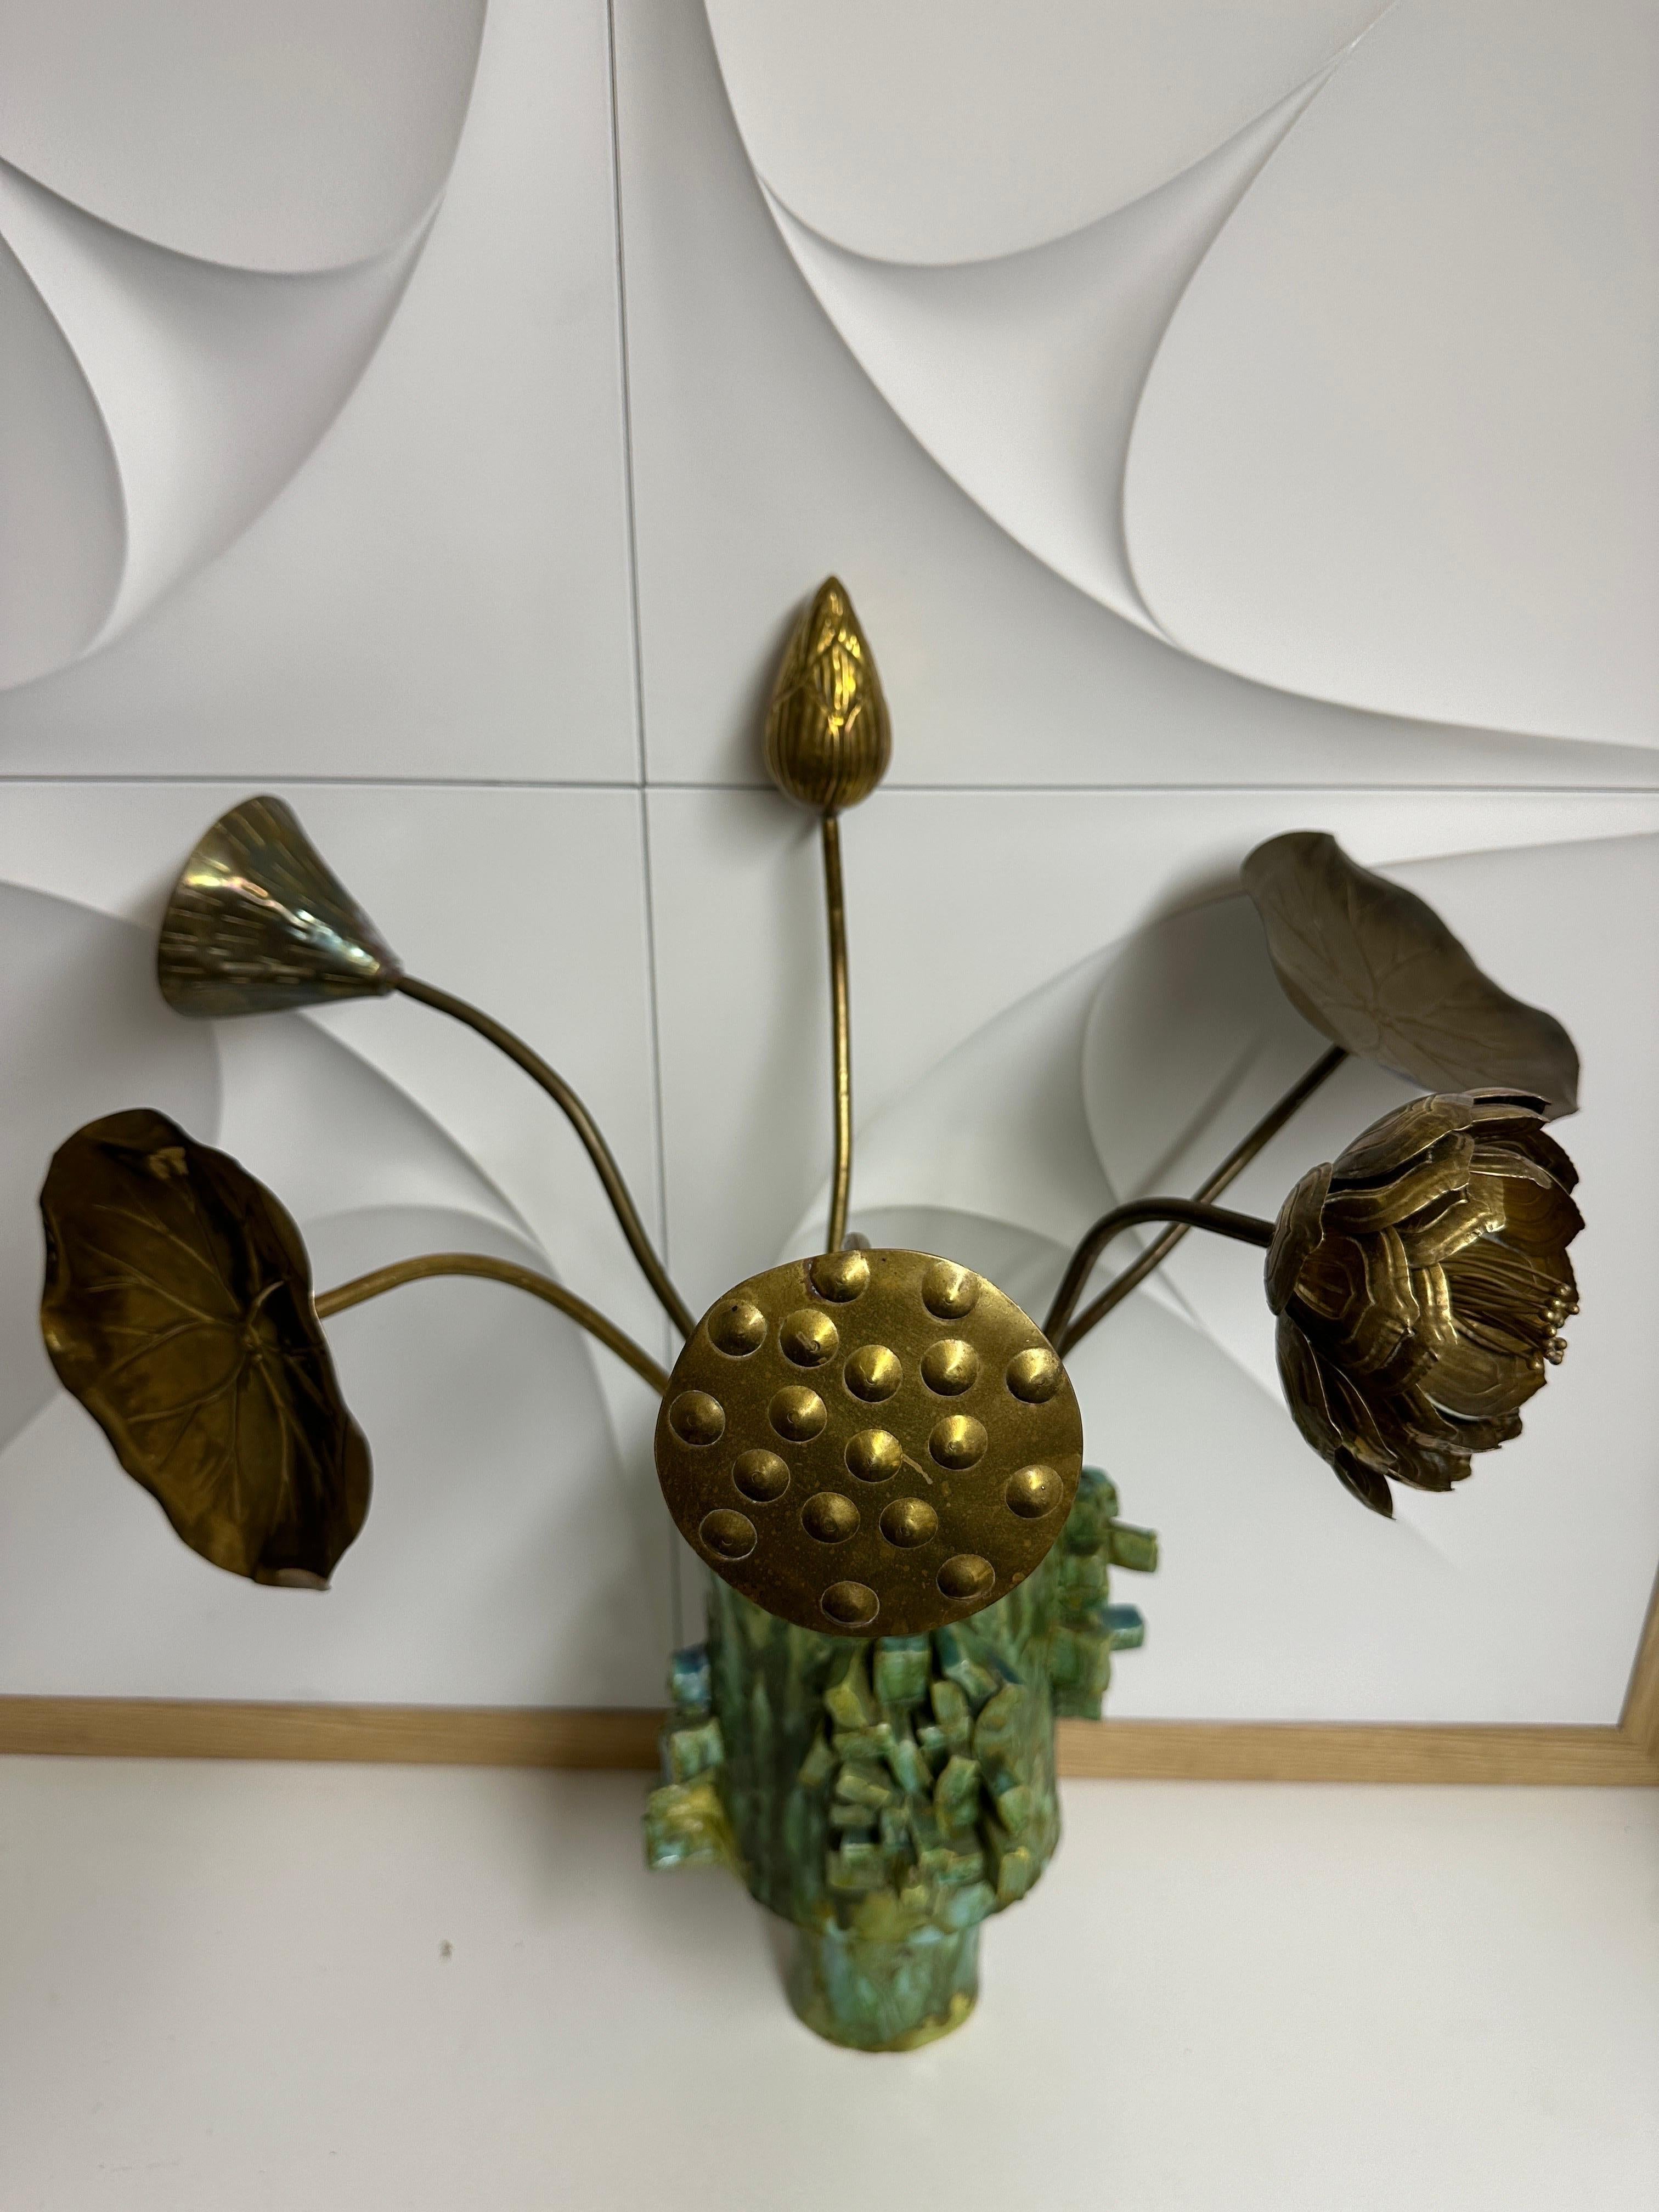 Set of six brass lotus flowers attributed to Feldman.
Ceramic pot is not included.
Flowers range from 19”-21” high. Lotus leaves are 6” diameter.